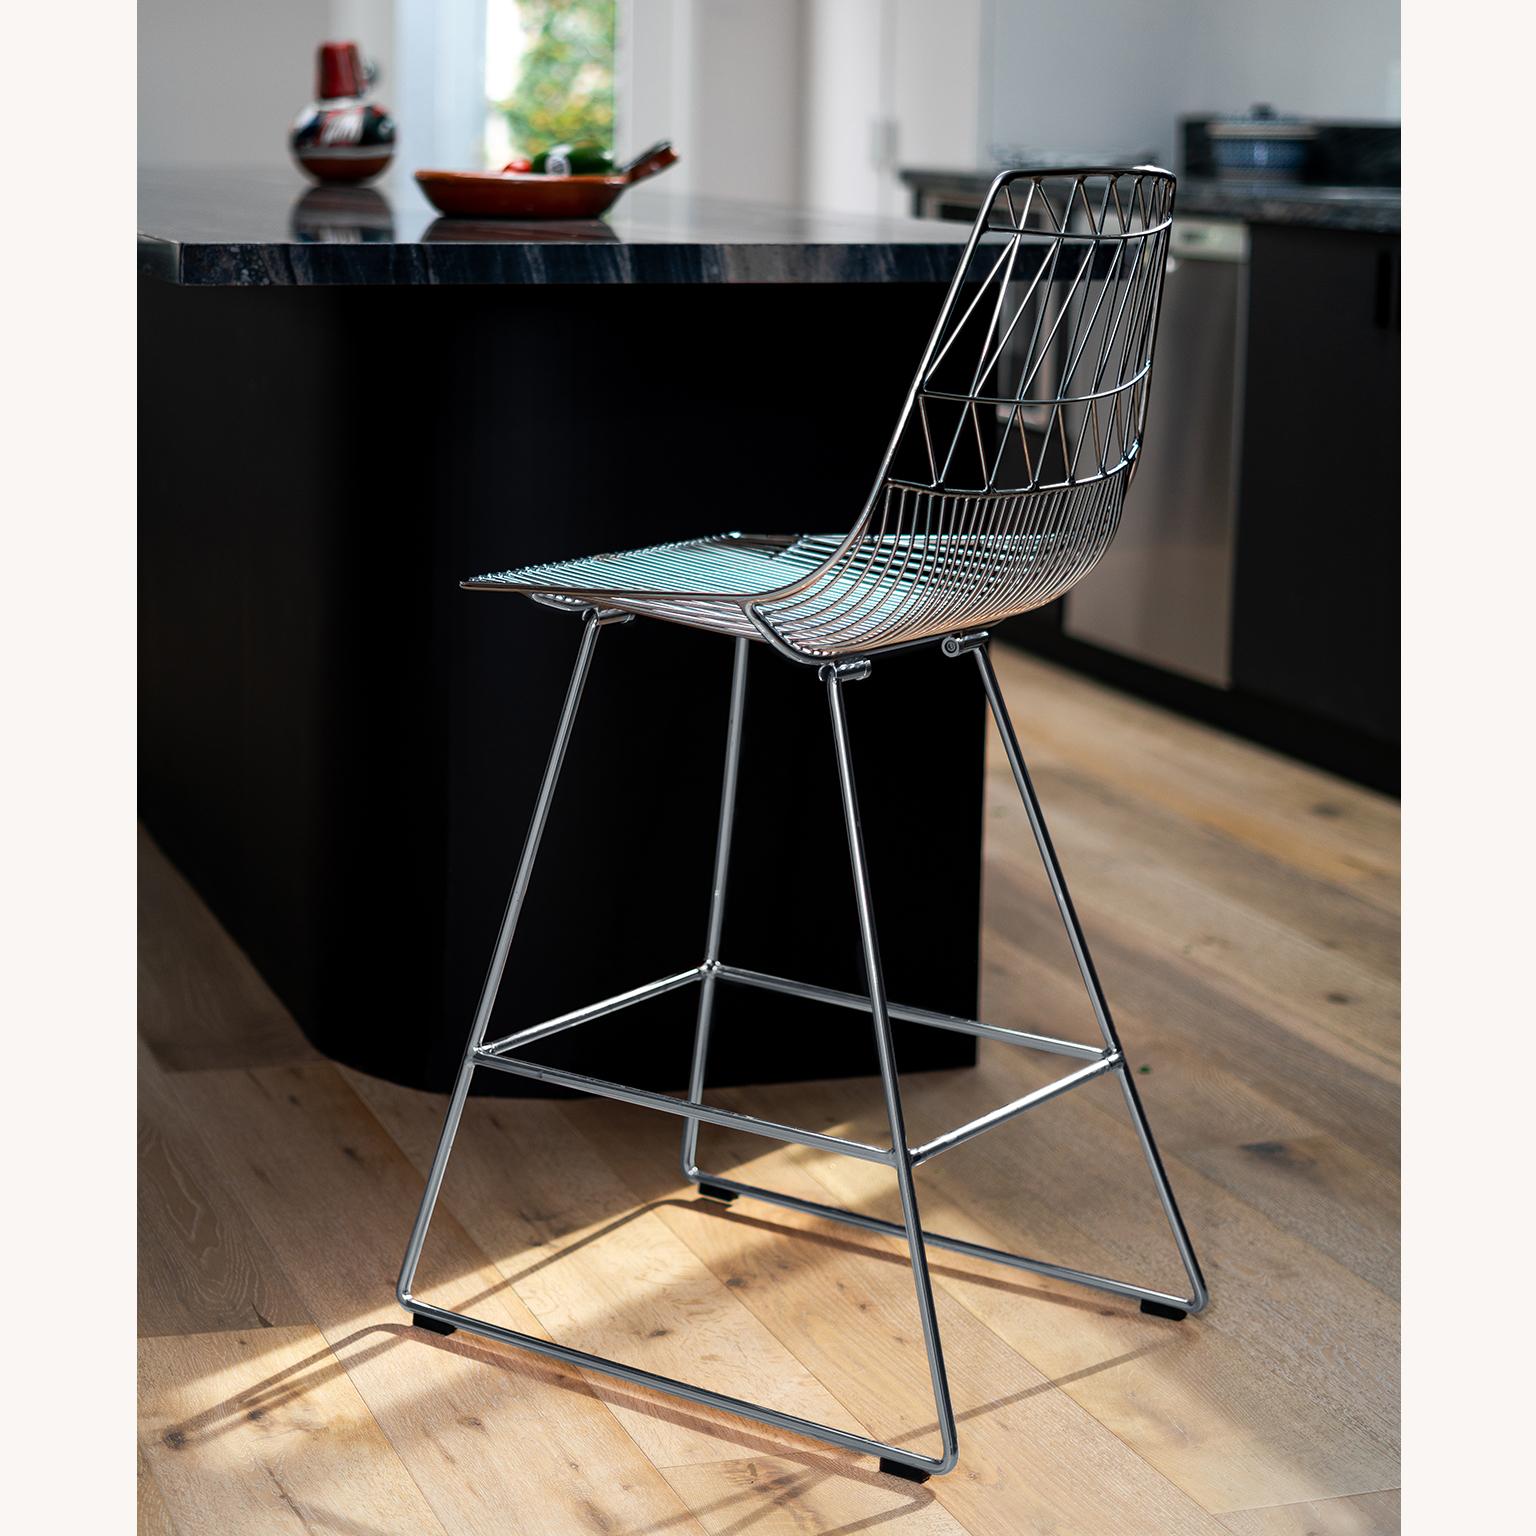 Galvanized Mid-Century Modern, Minimalist Counter Stool, in Gold by Bend Goods